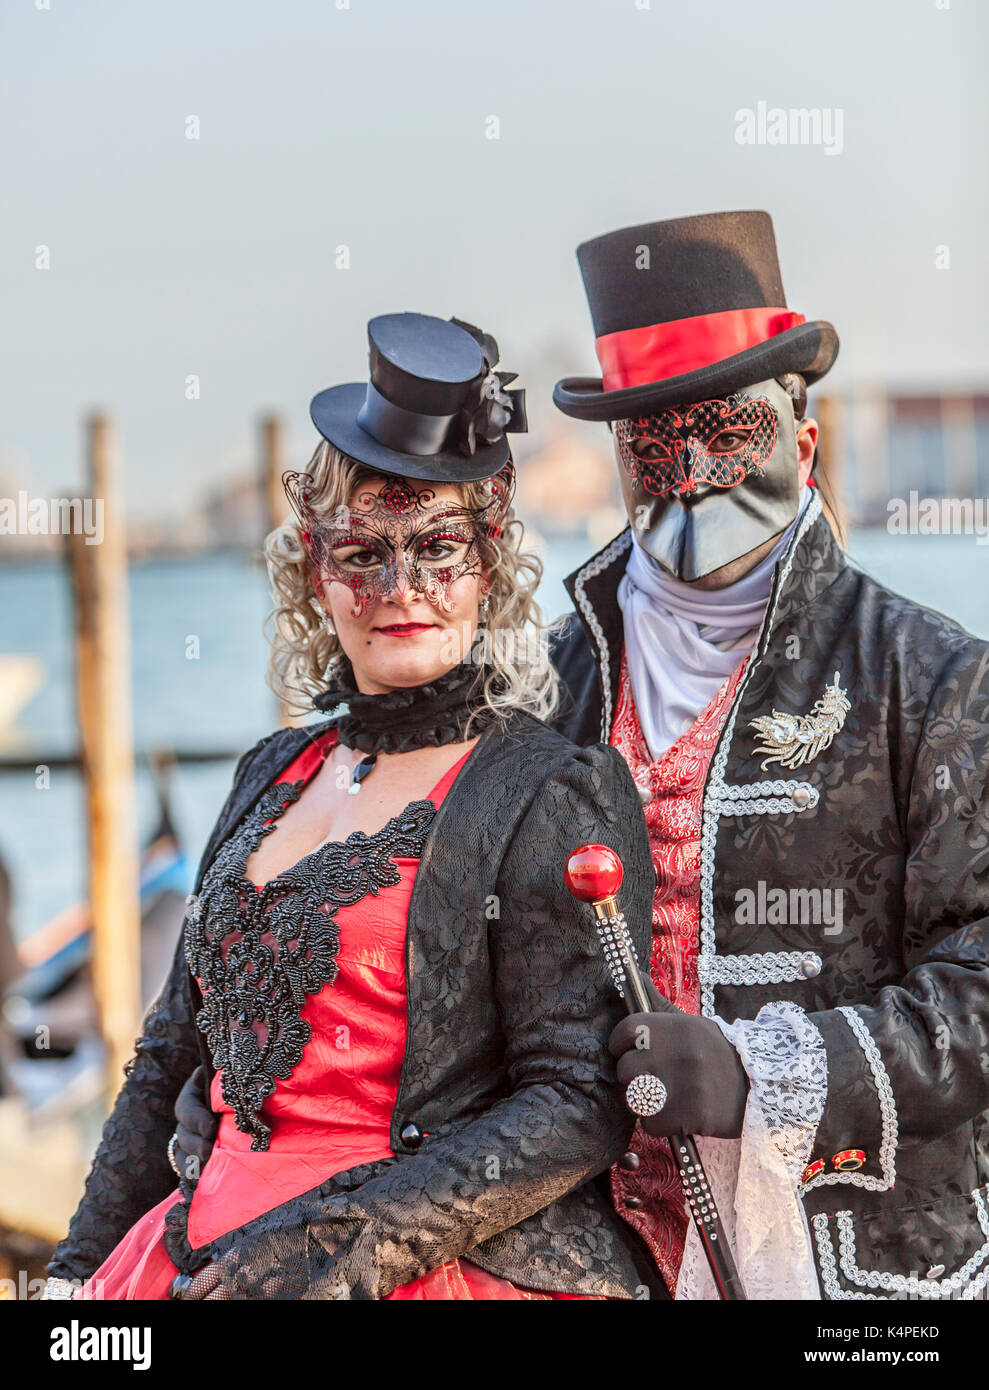 Venice, Italy- February 18th, 2012: Environmental portrait of an unidentified couple wearing black disguises and traditional Venetian masks during the Stock Photo